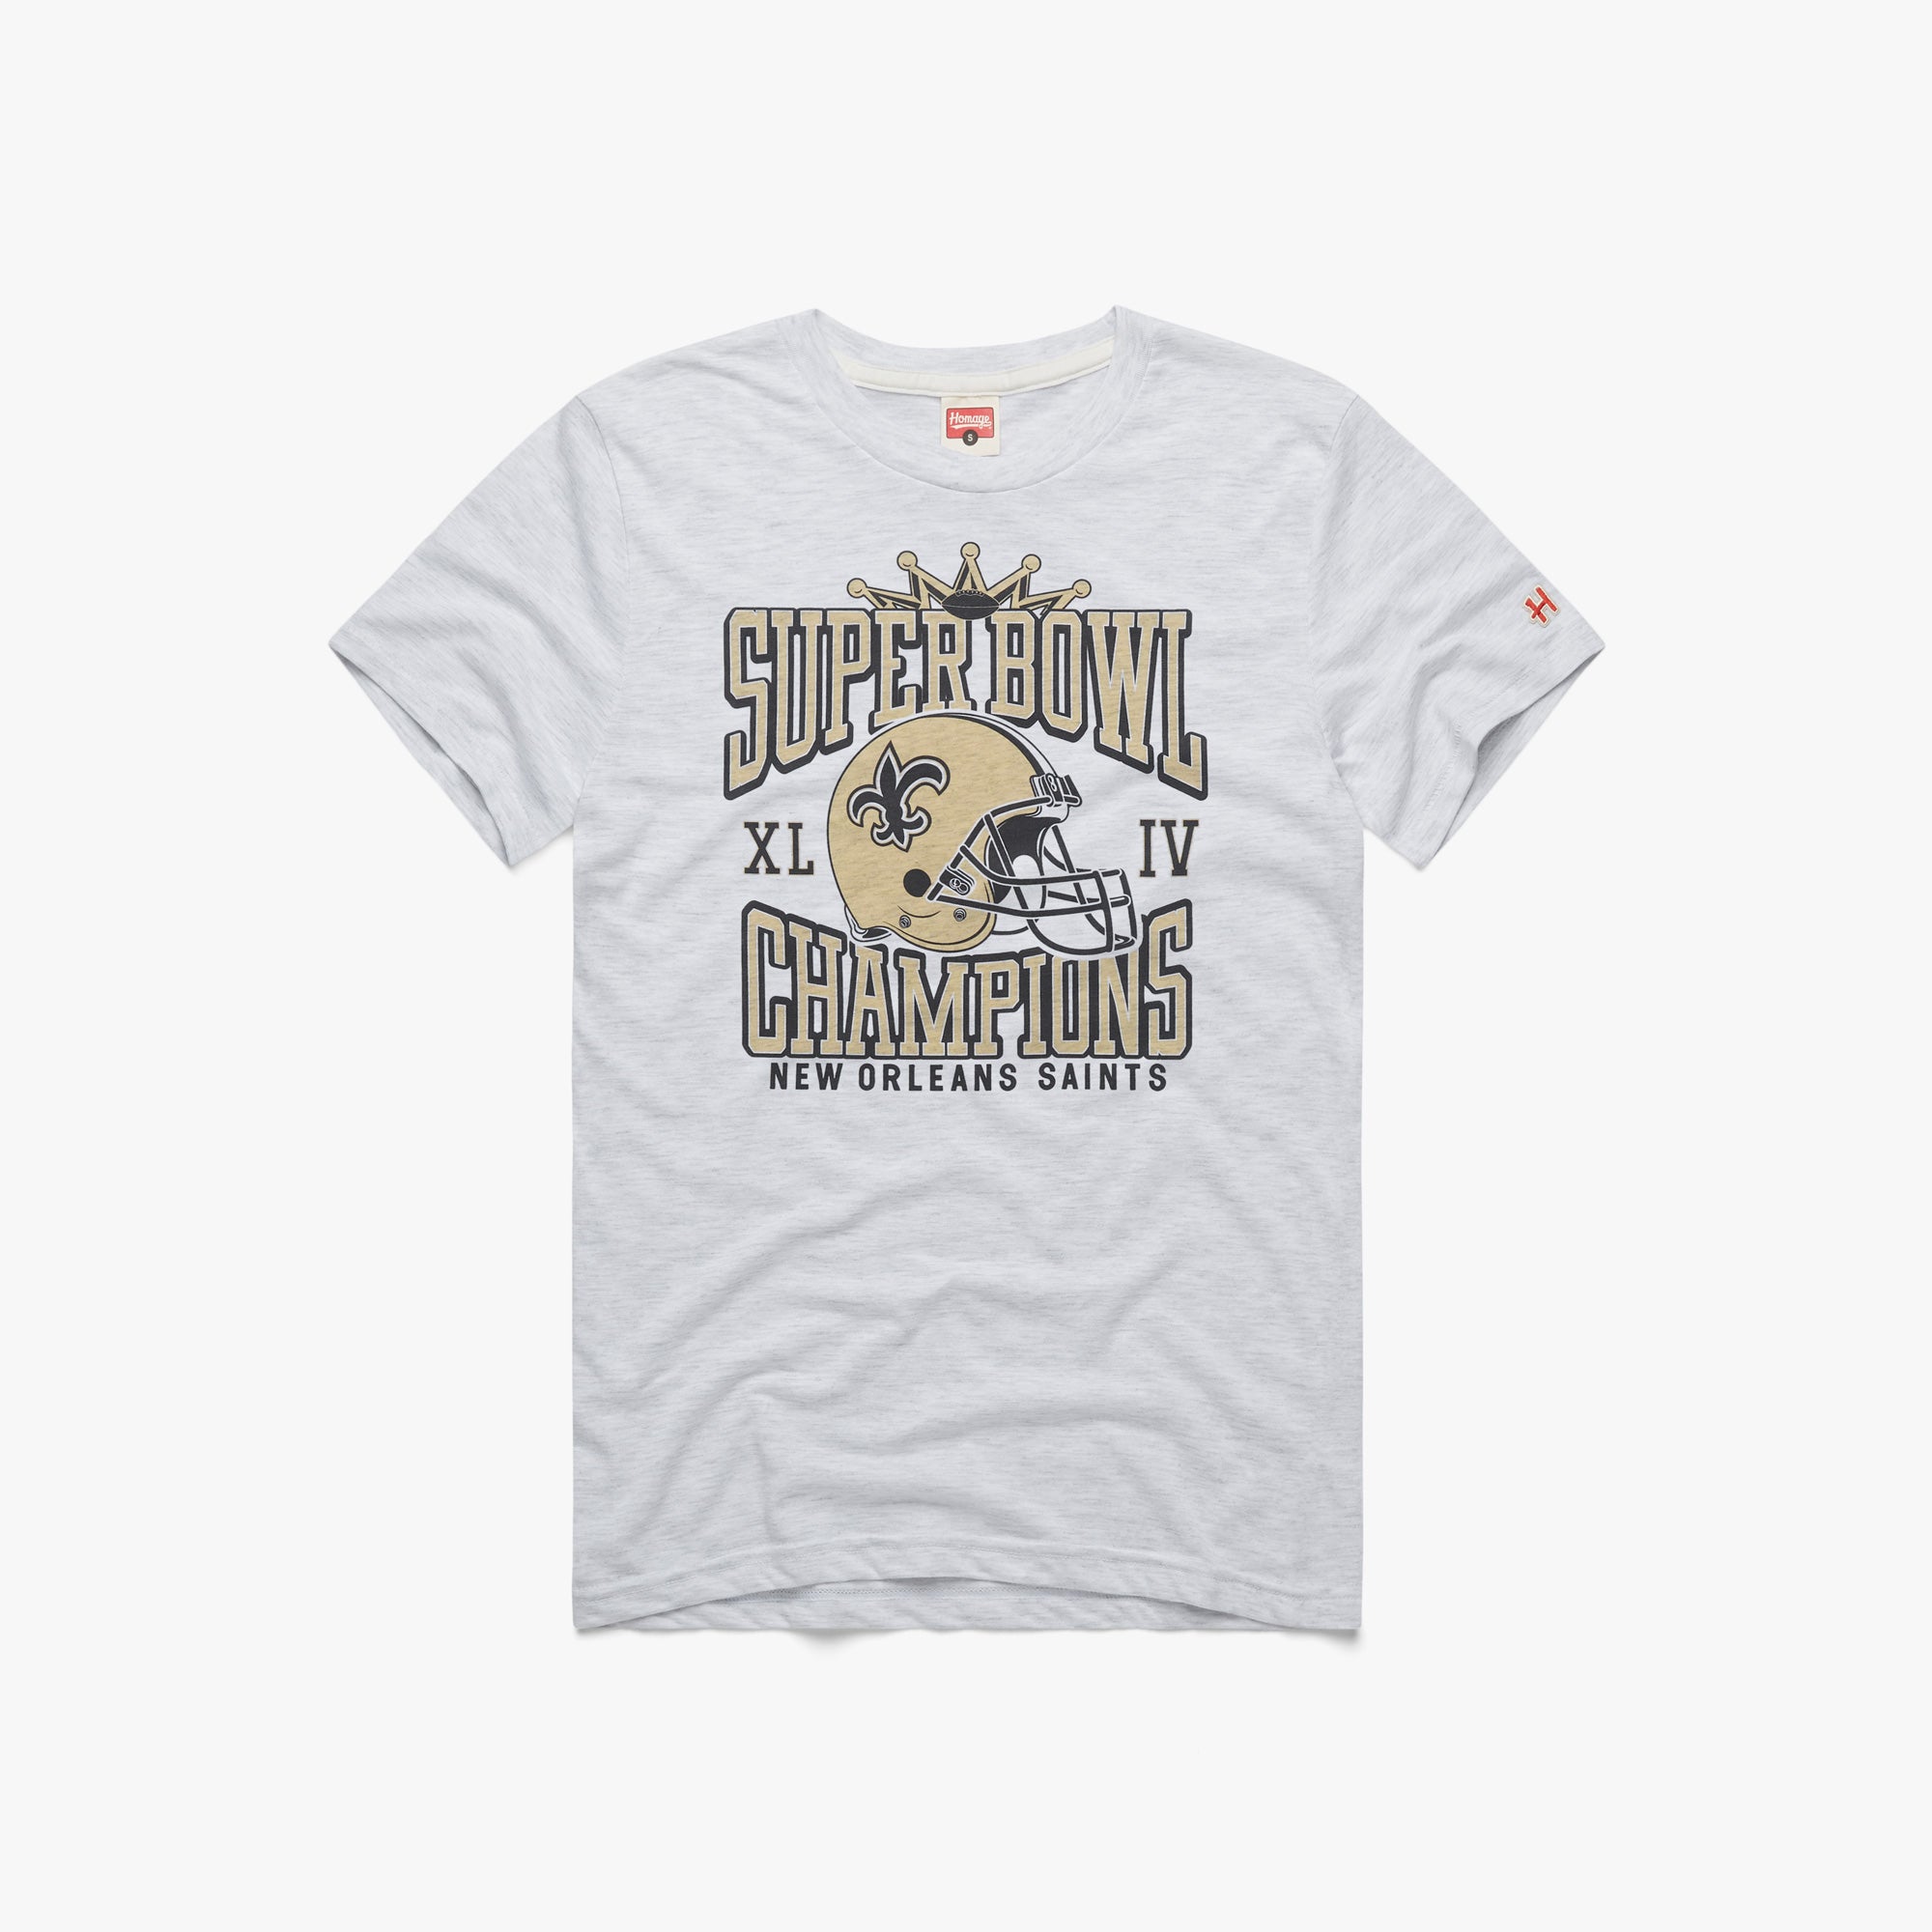 New Orleans Saints Super Bowl XLIV Champs T-Shirt from Homage. | Officially Licensed Vintage NFL Apparel from Homage Pro Shop.